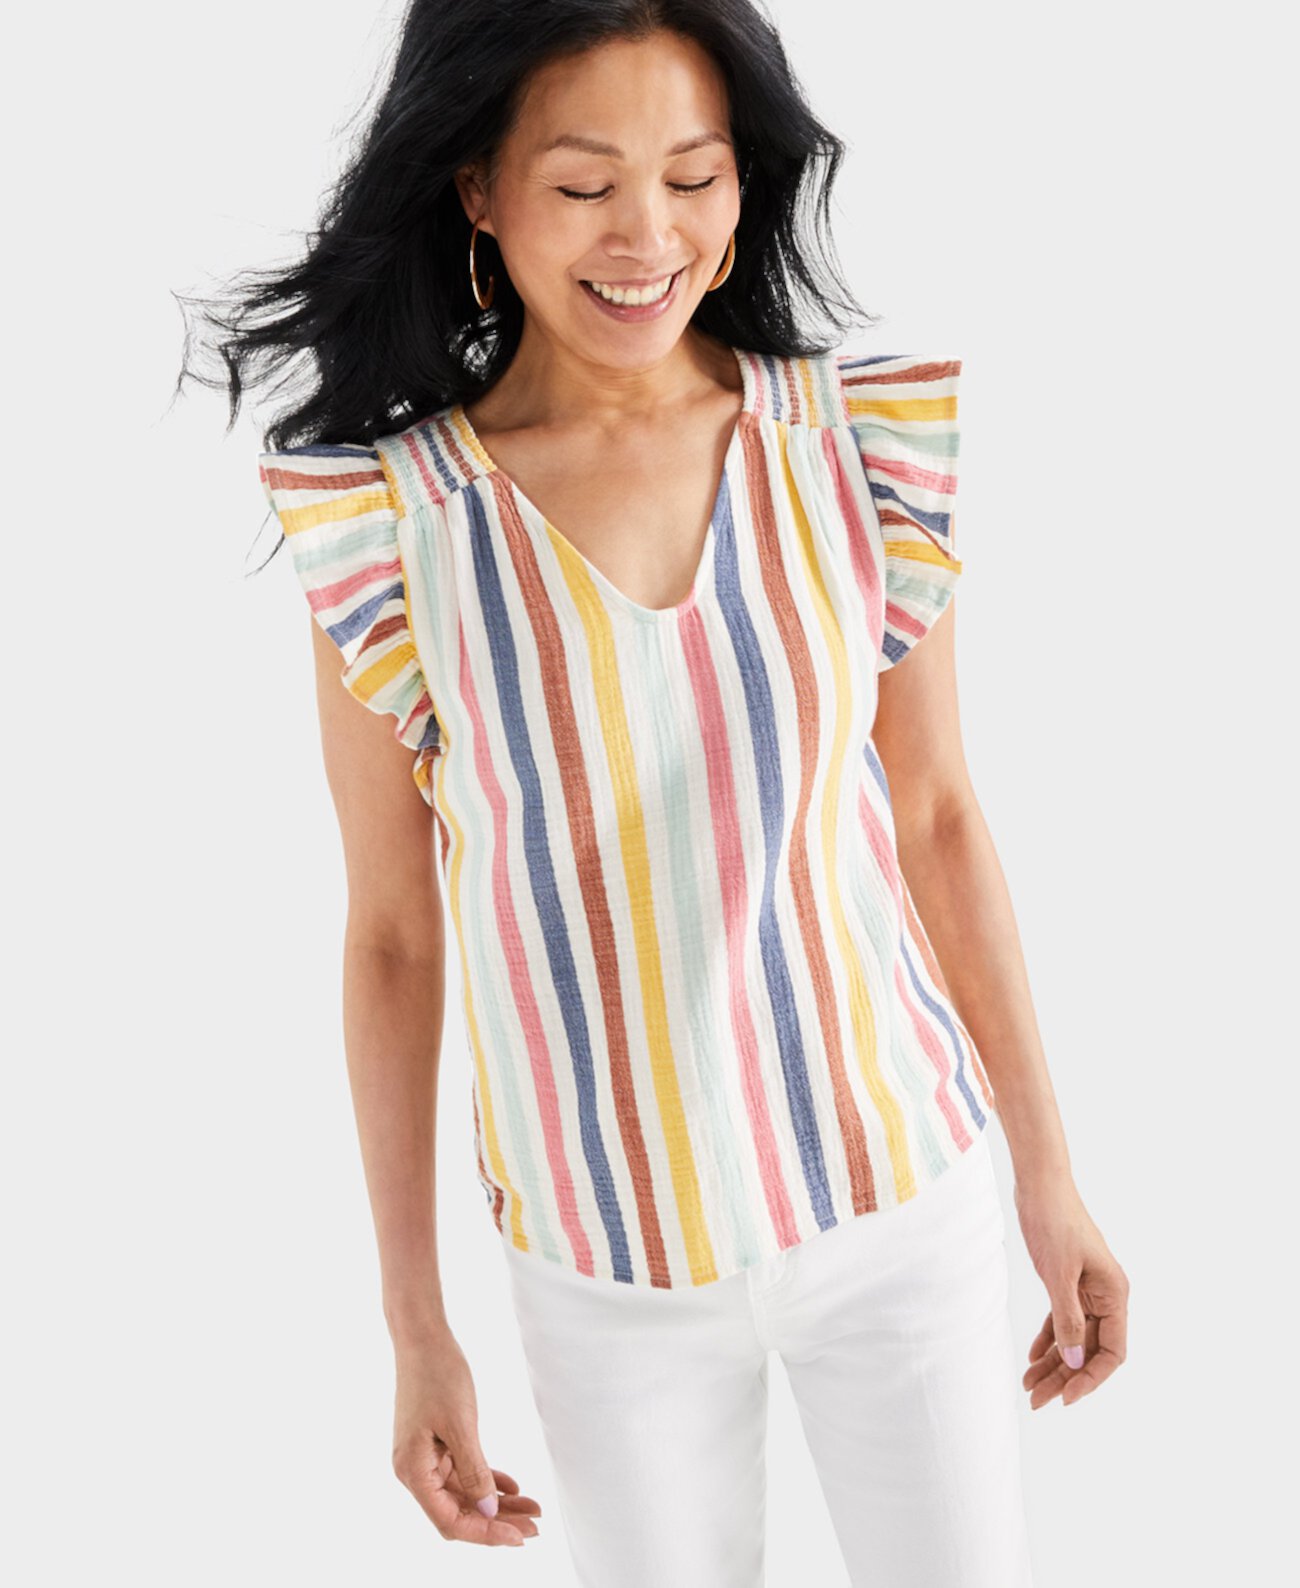 Petite Striped Gauze Flutter Sleeve Top, Created for Macy's Style & Co